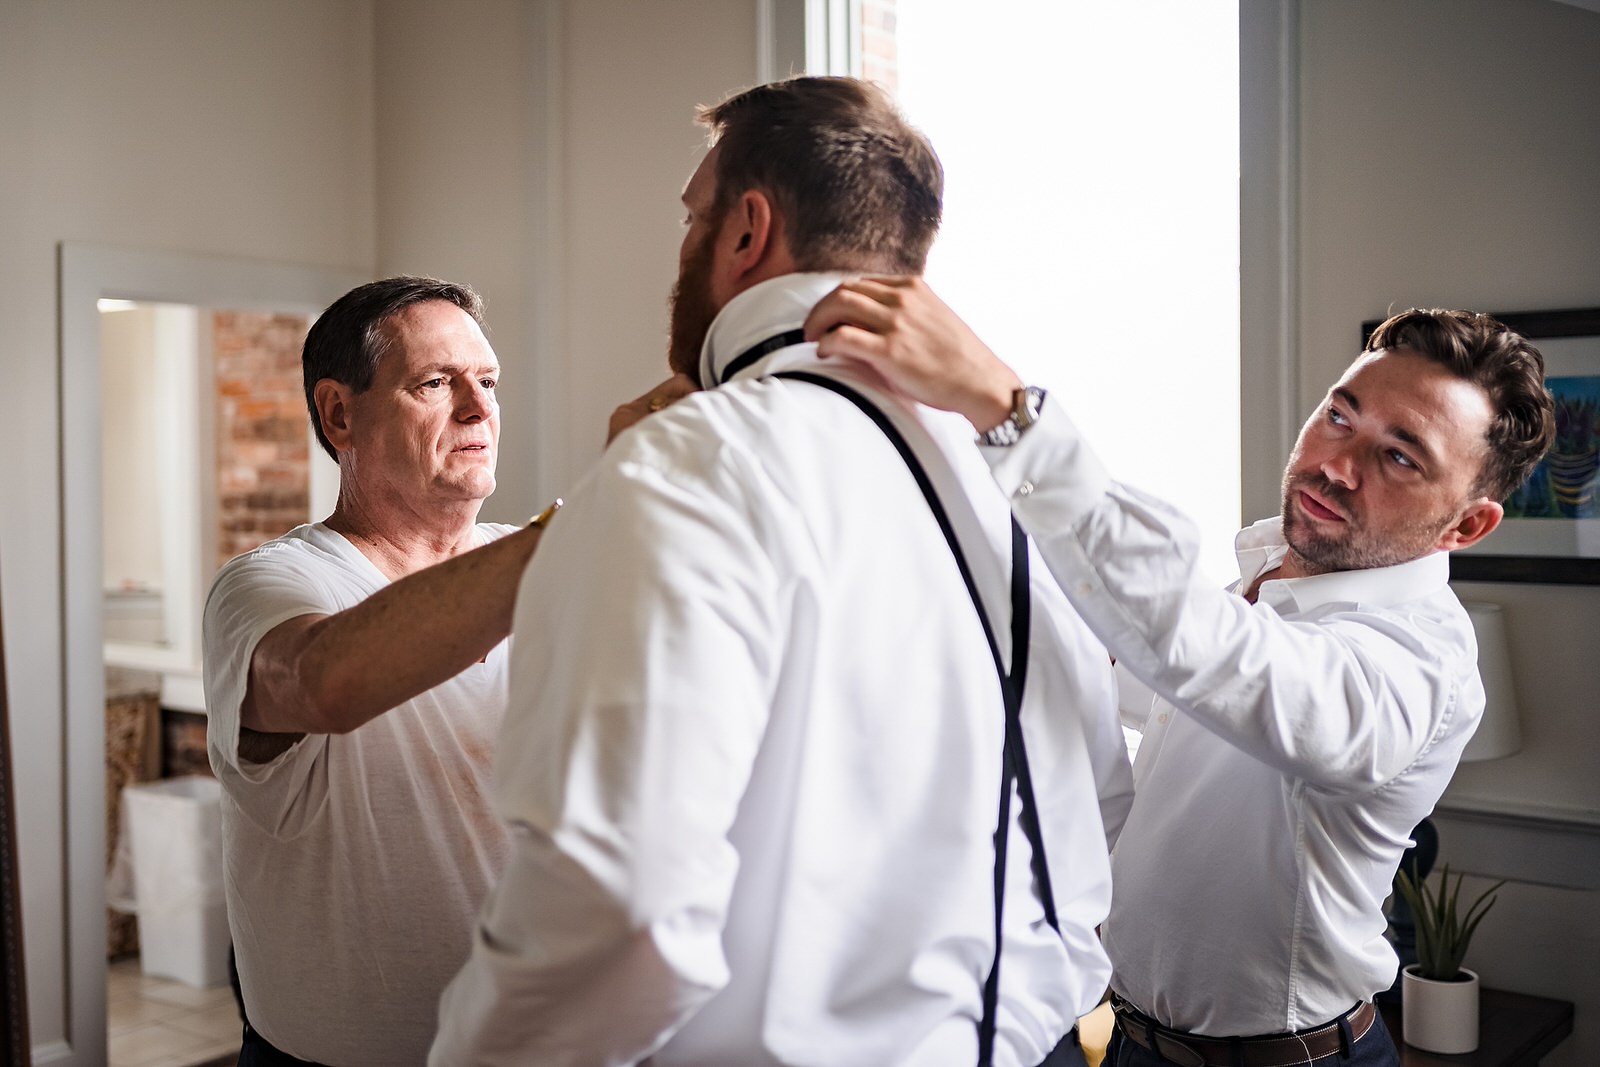 Groom's father and friend help him with his bow tie